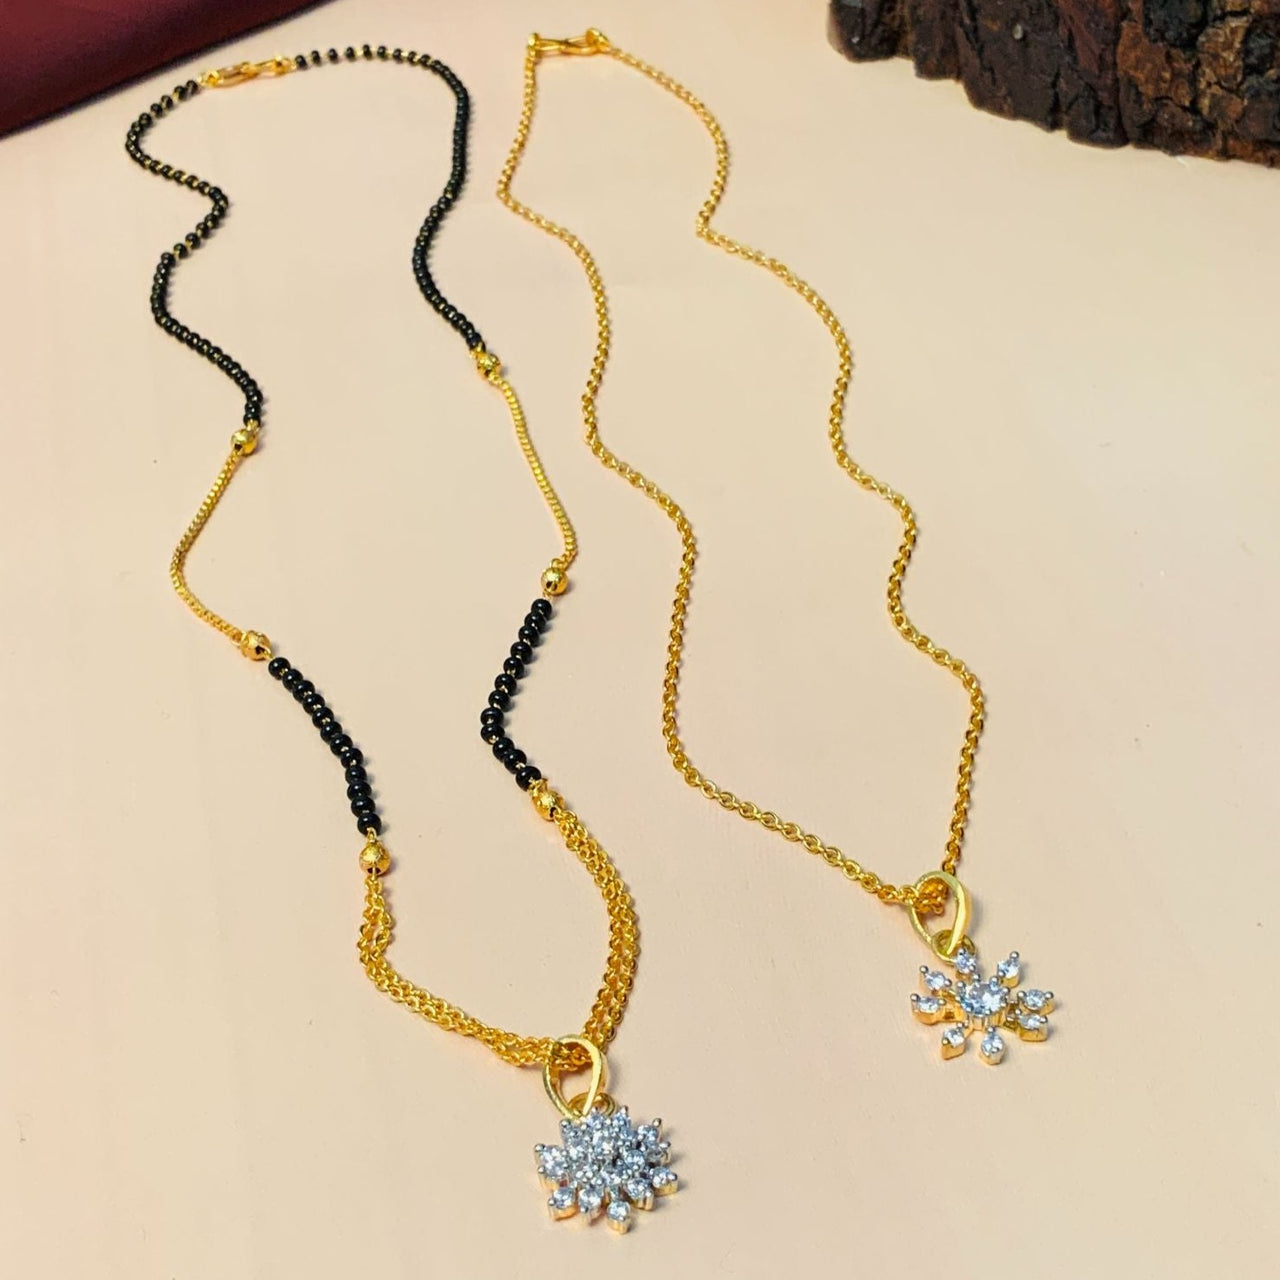 High Quality Gold Plated American Diamond Mangalsutra & Pendant Chain Combo